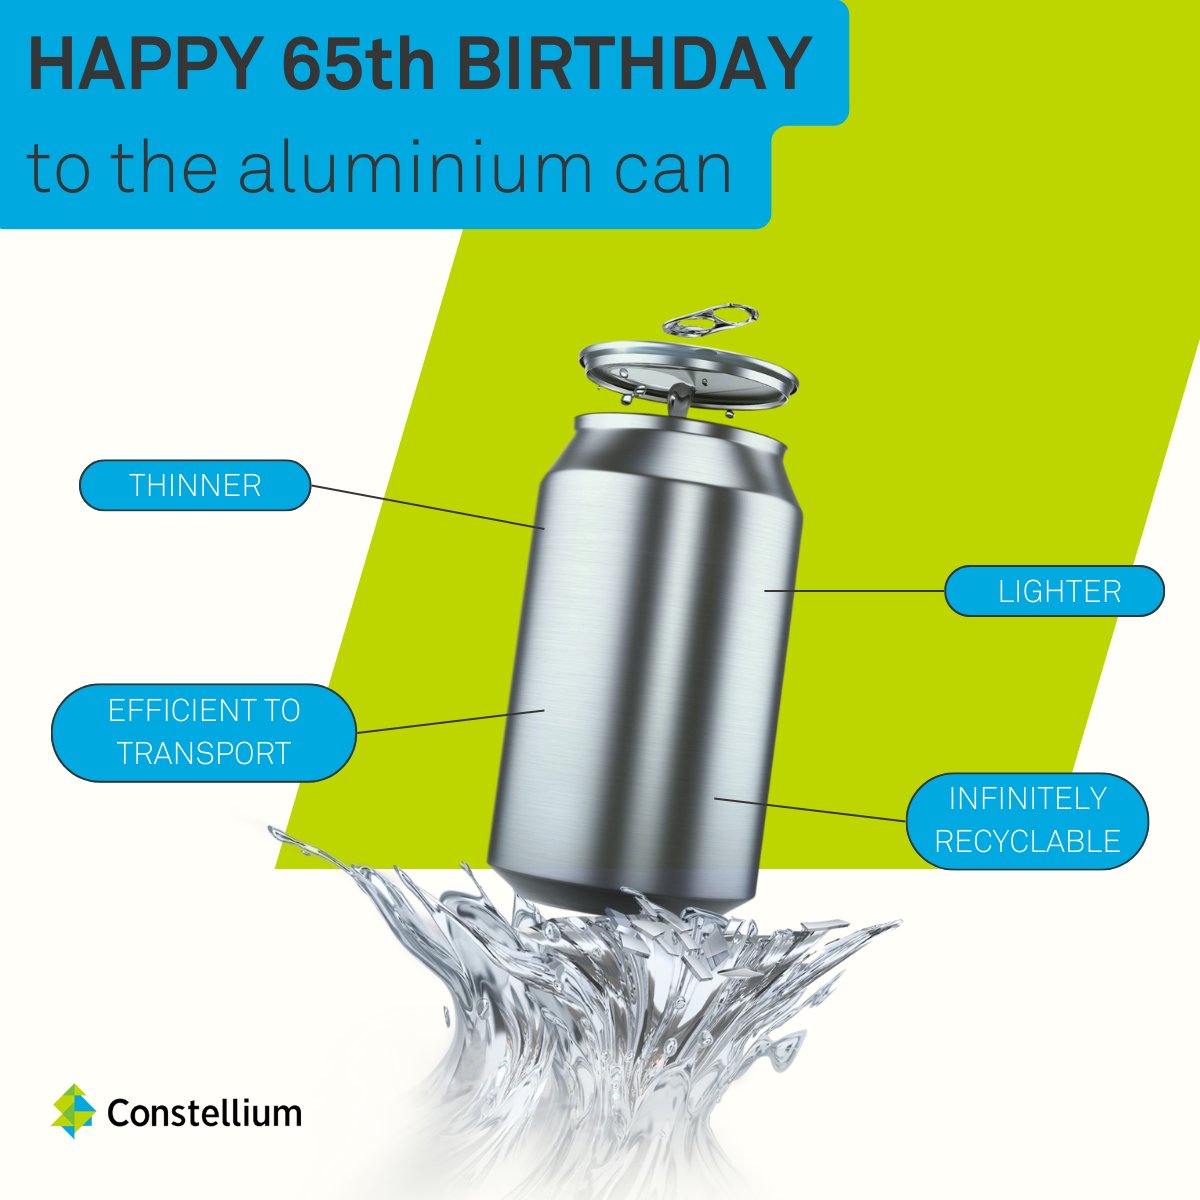 Today marks the 65th birthday of the recyclable #aluminium can! Constellium continues to innovate on this classic aluminium packaging, while prioritizing sustainability. Learn more: ow.ly/emAZ50QsIyh

#IdeasMaterialized #OTD  #aluminum #packaging #recycle